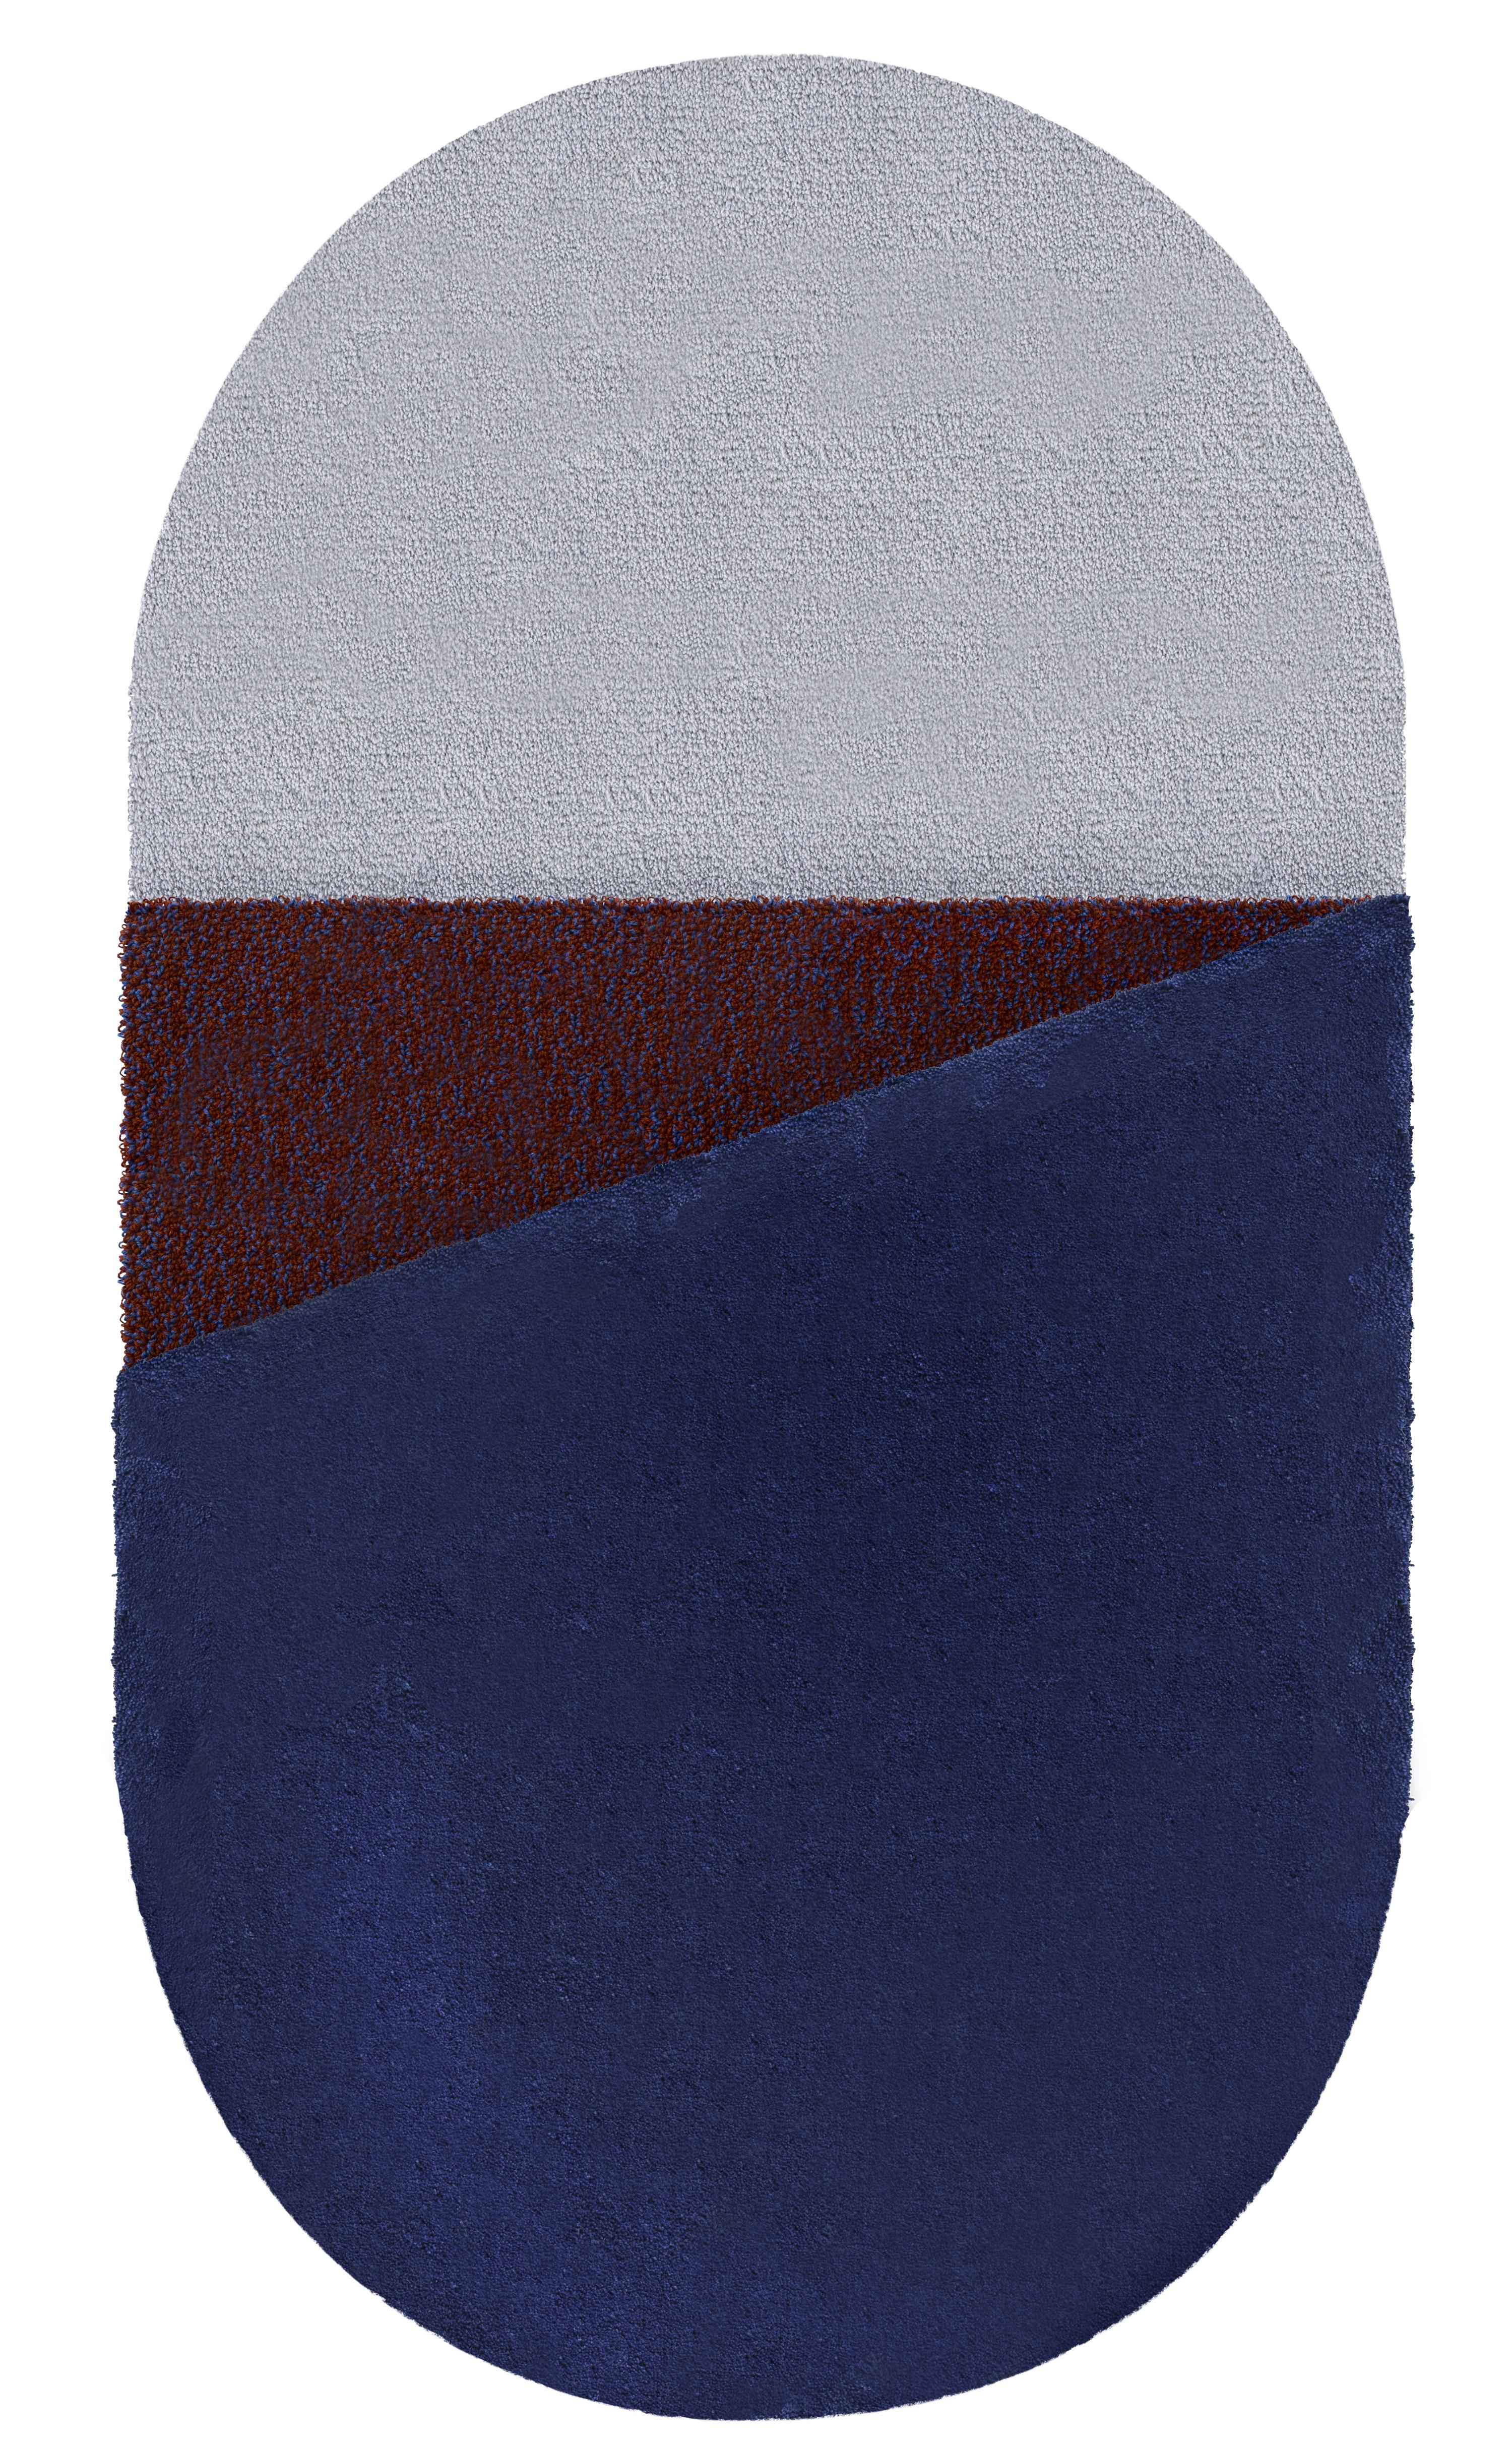 Medium blue oci right rug by Seraina Lareida.
Dimensions: W 110 x H 200 cm.
Materials: 100% New Zeland top-quality wool.
Available in sizes Small or Large. Also available in colors: Brick/Pink, Yellow/Gray, Brick/Pink, Bordeaux/Ecru and,